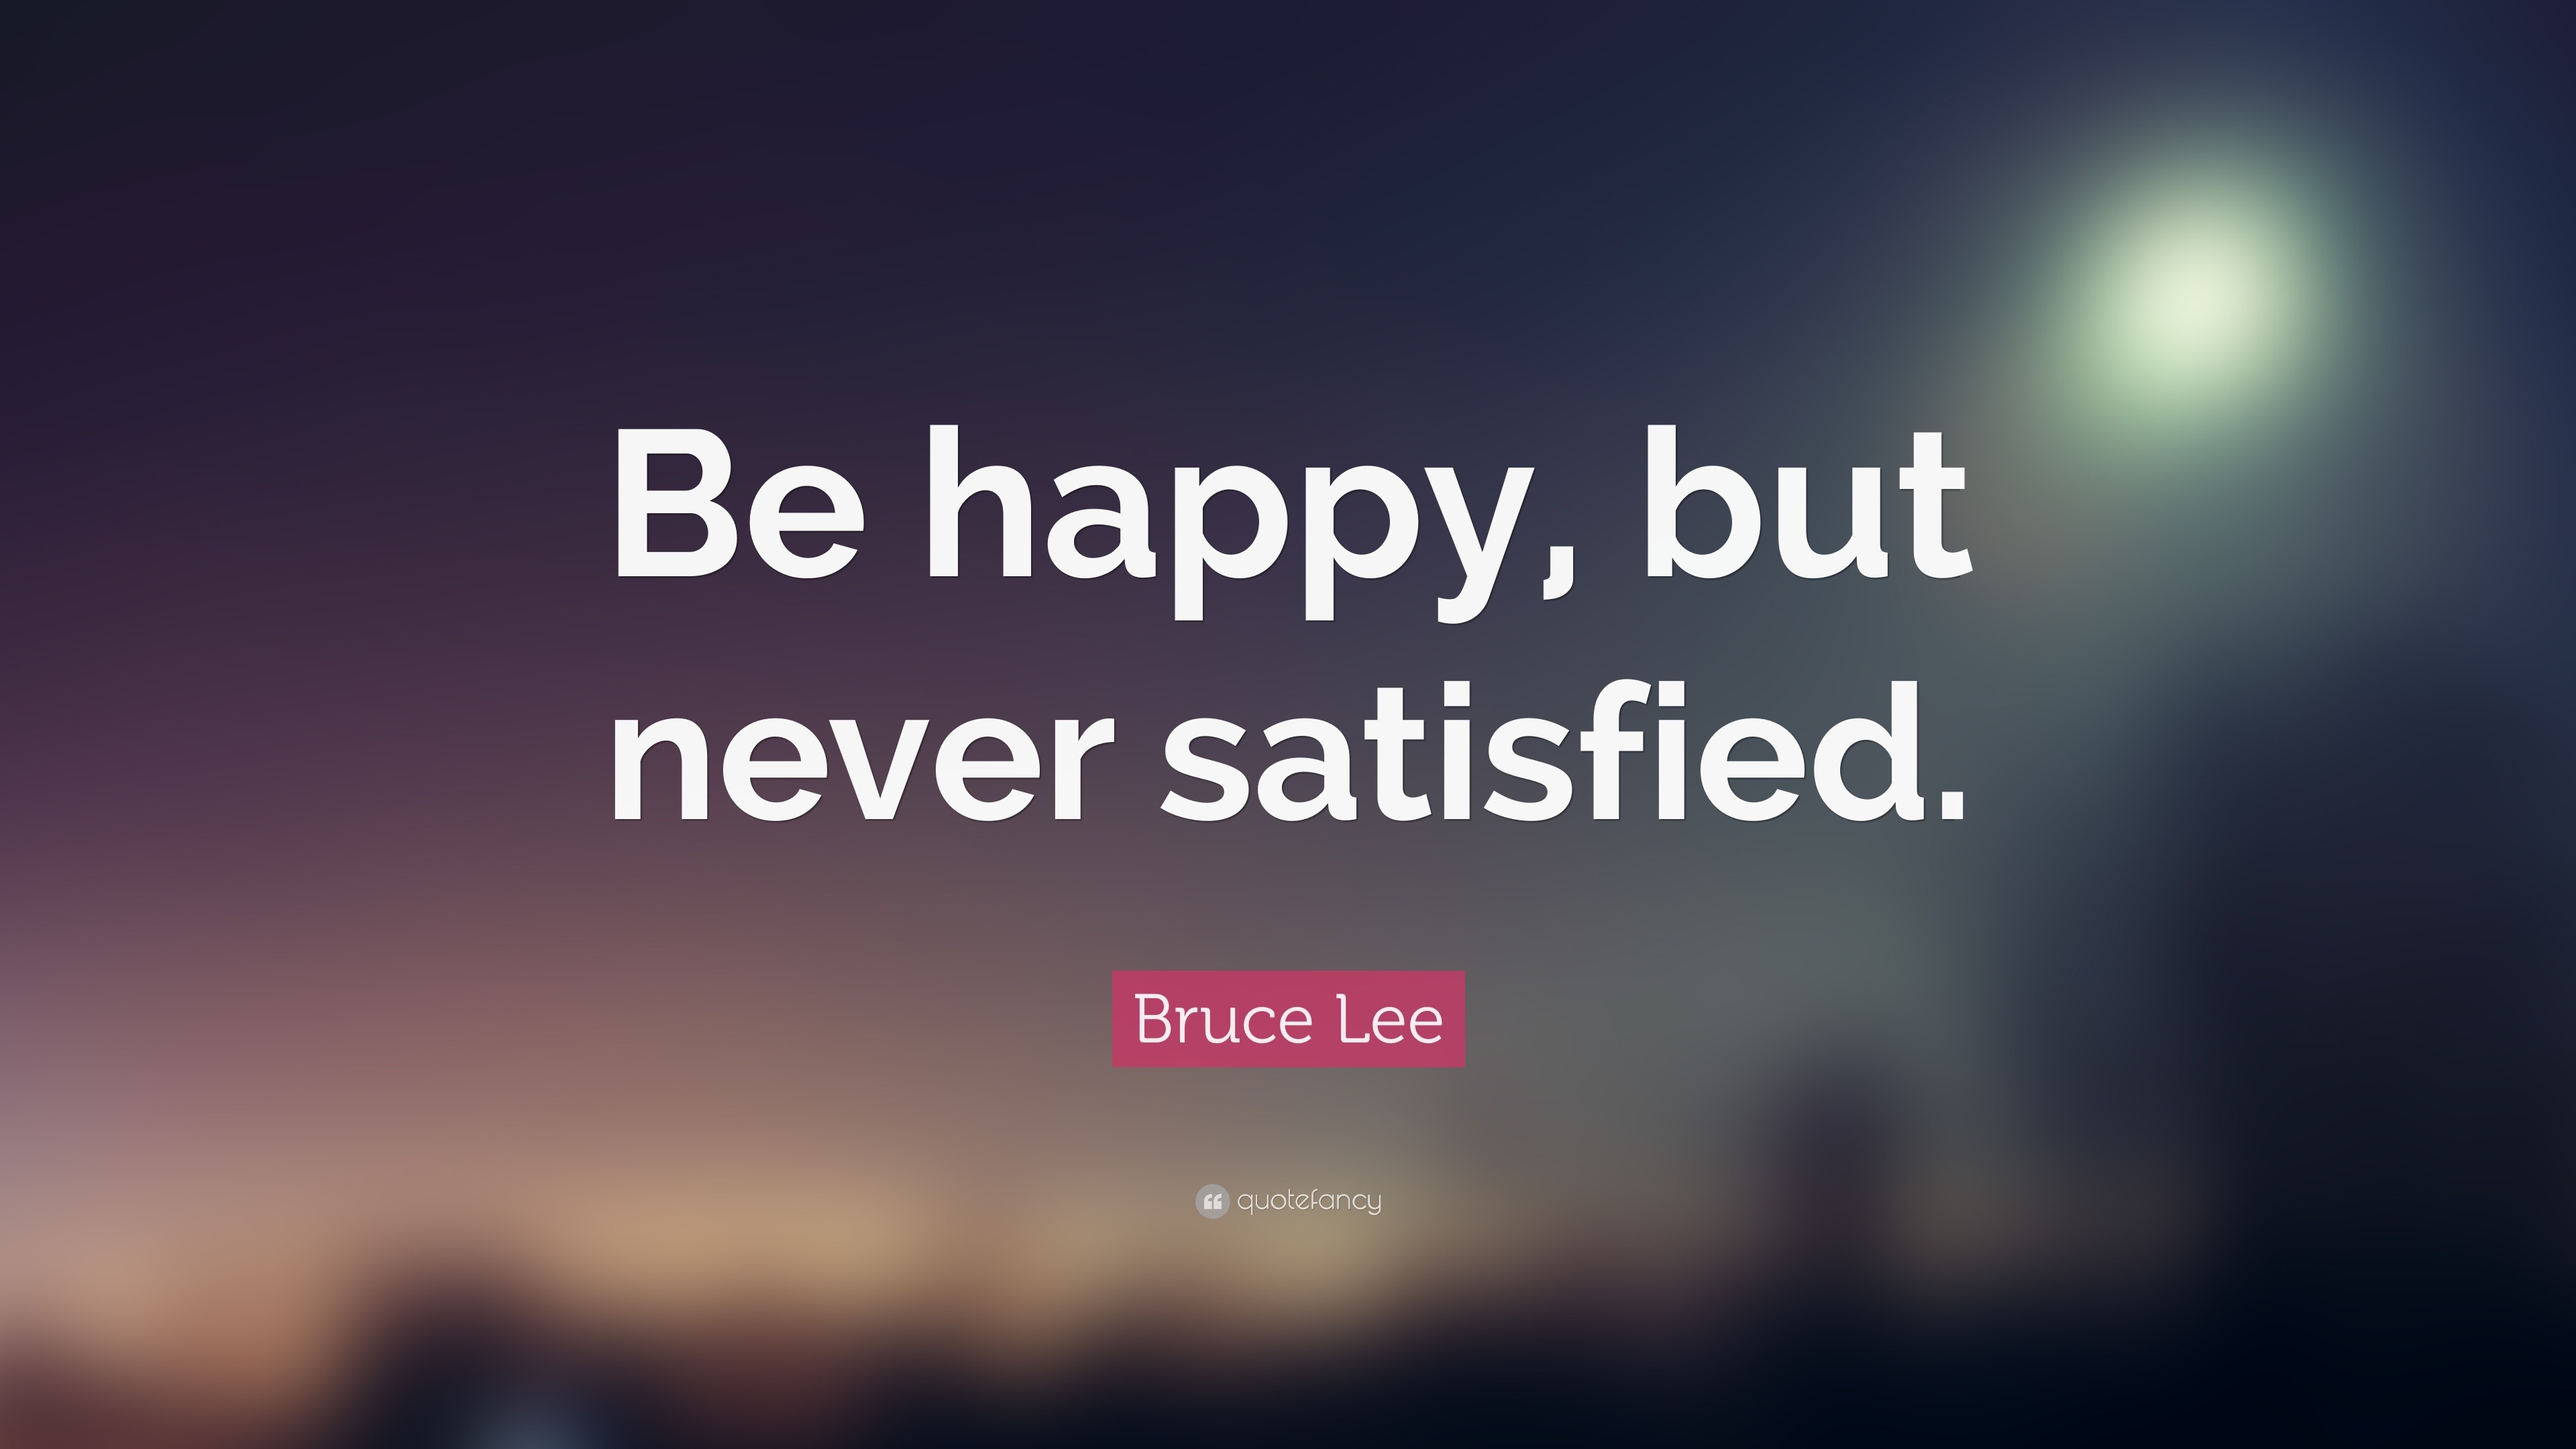 Bruce Lee Quote: “Be happy, but never satisfied.” (22 wallpapers) - Quotefancy